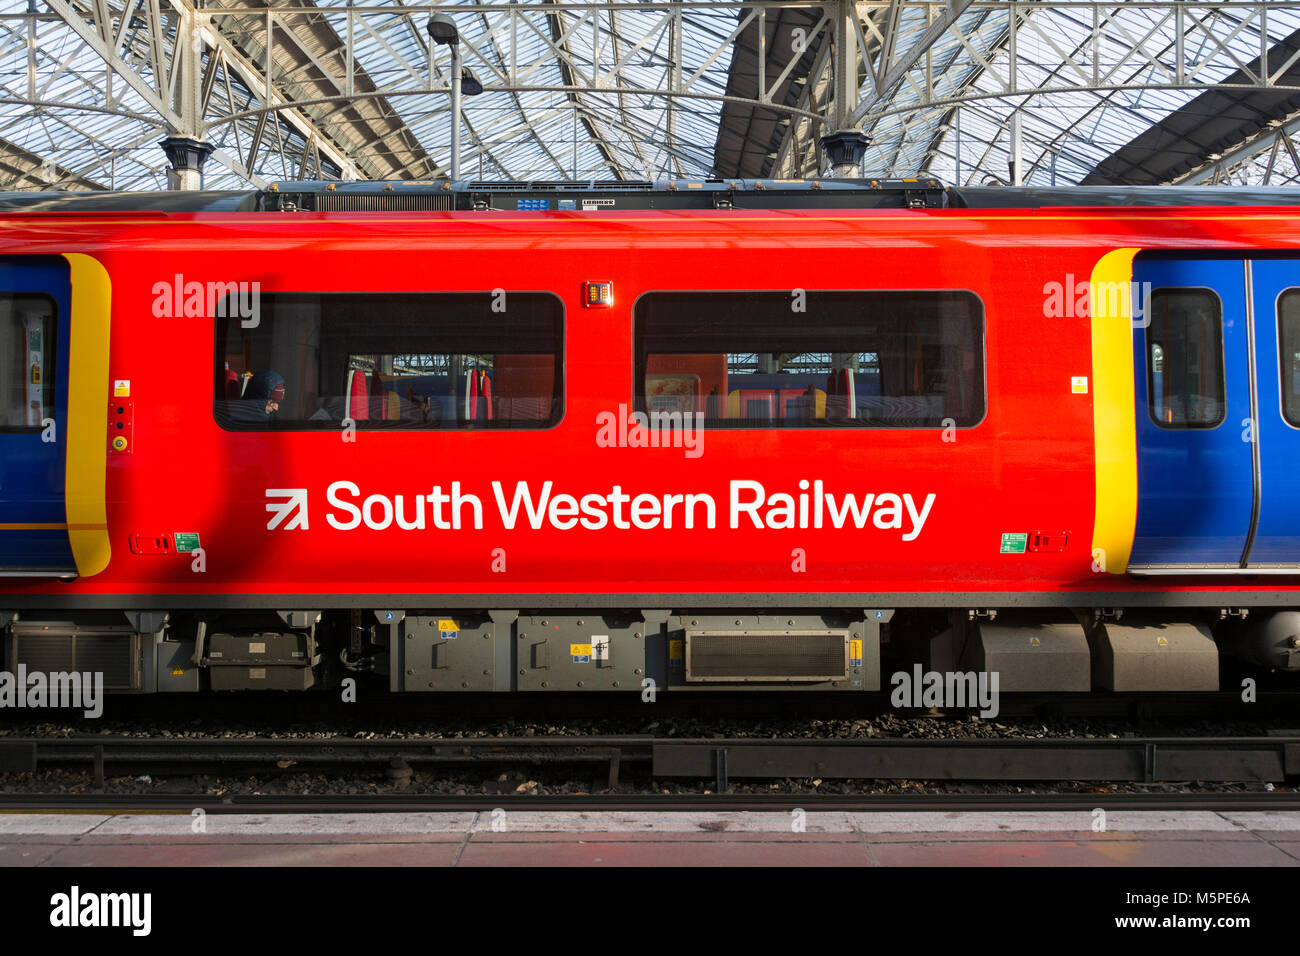 Closeup of a First Group/MTR South Western Railway Desiro City class 707 train, built by Siemens, waiting at Waterloo Station. Stock Photo